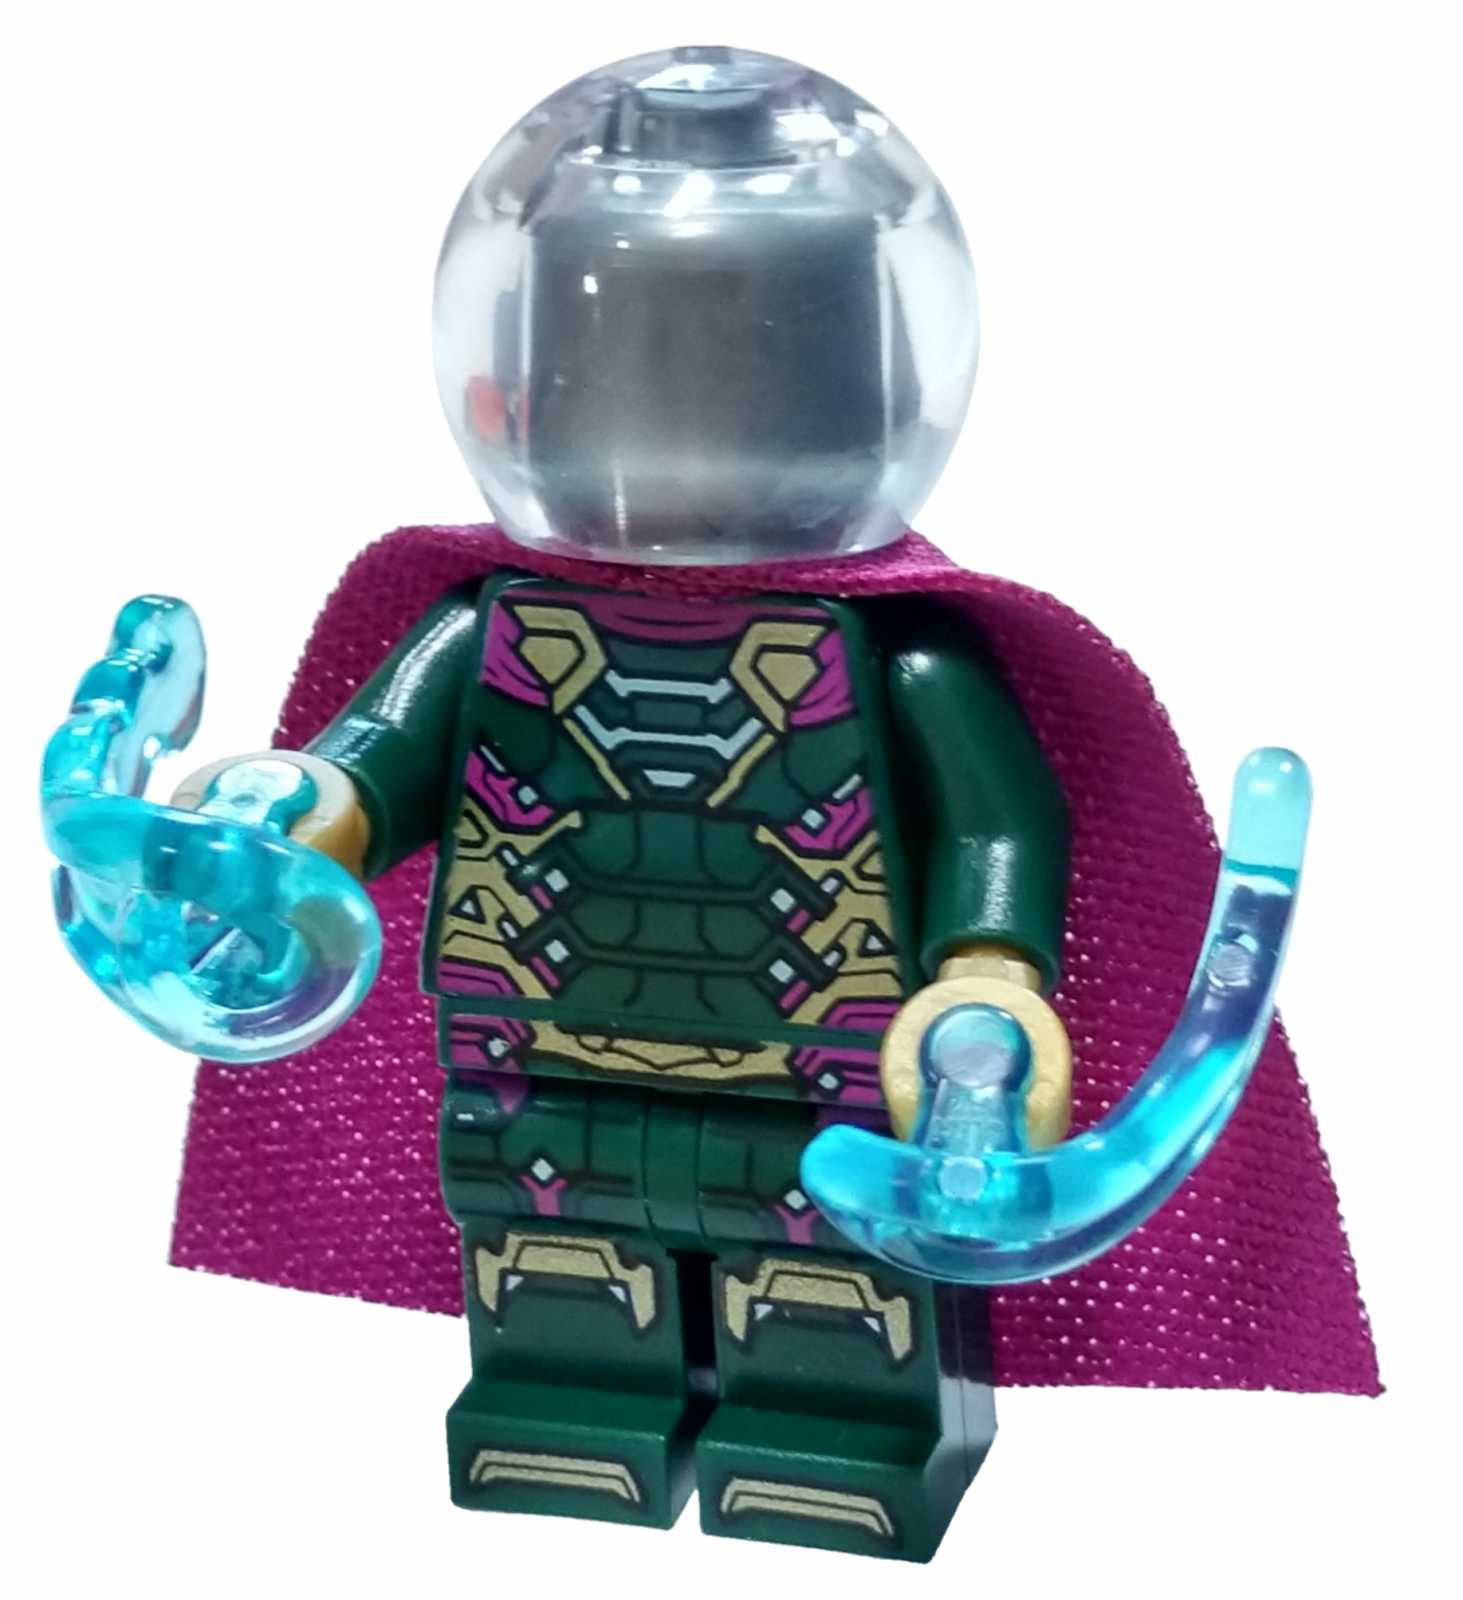 Mysterio Spider-Man Far from home minifigure TV show Marvel movie toy figure